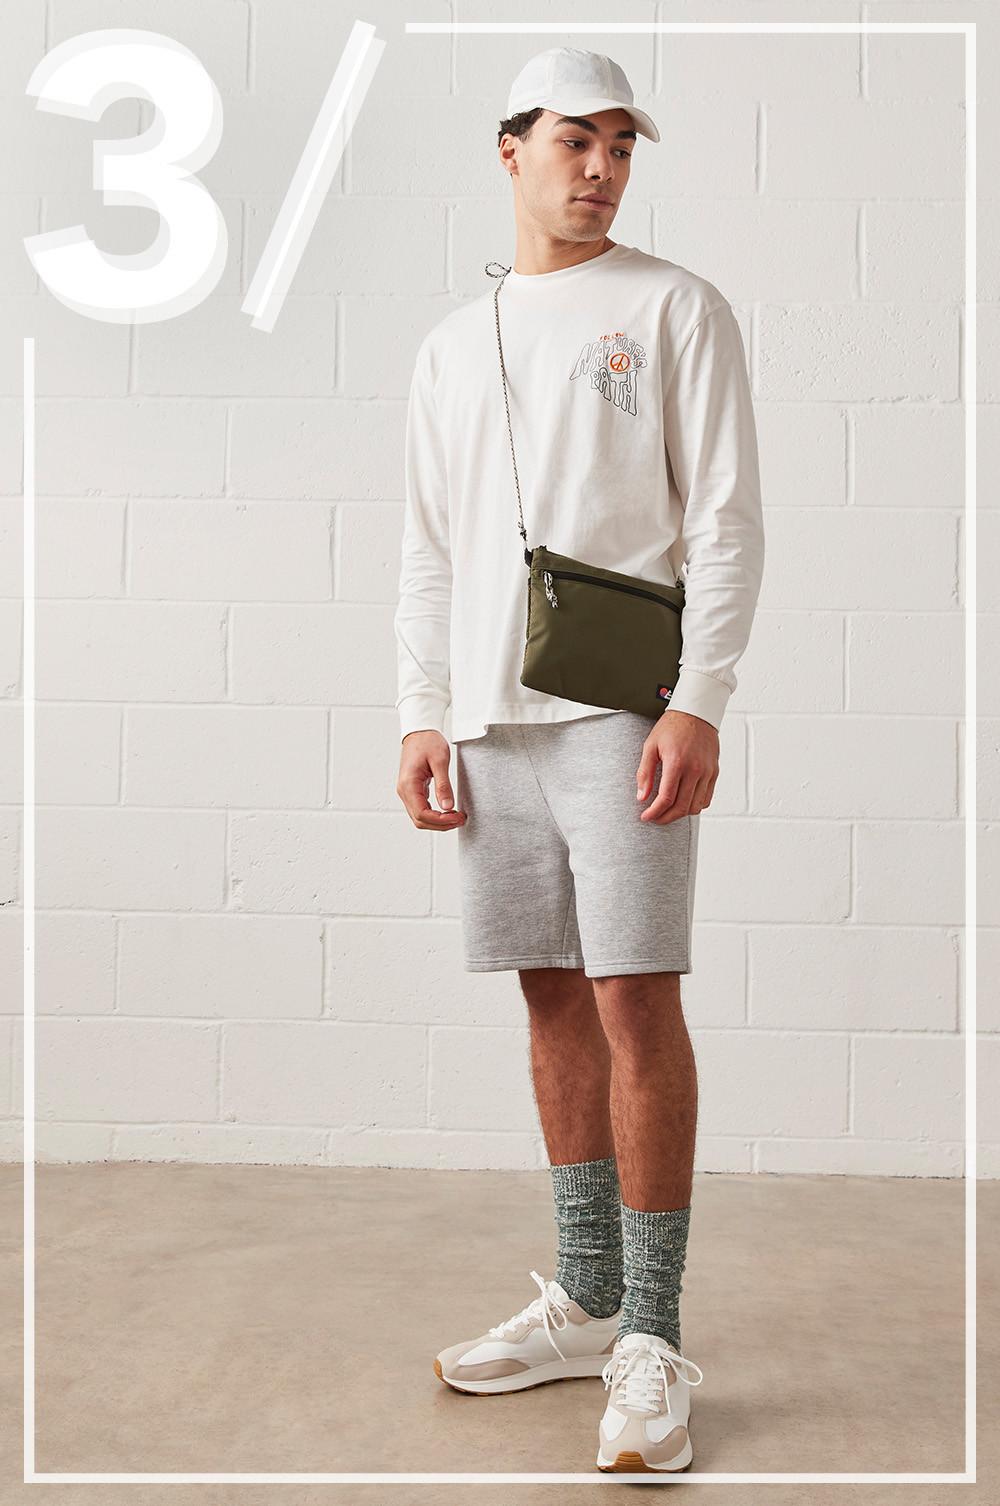 Model wears grey jogger shorts, long sleeved white top, with matching white cap